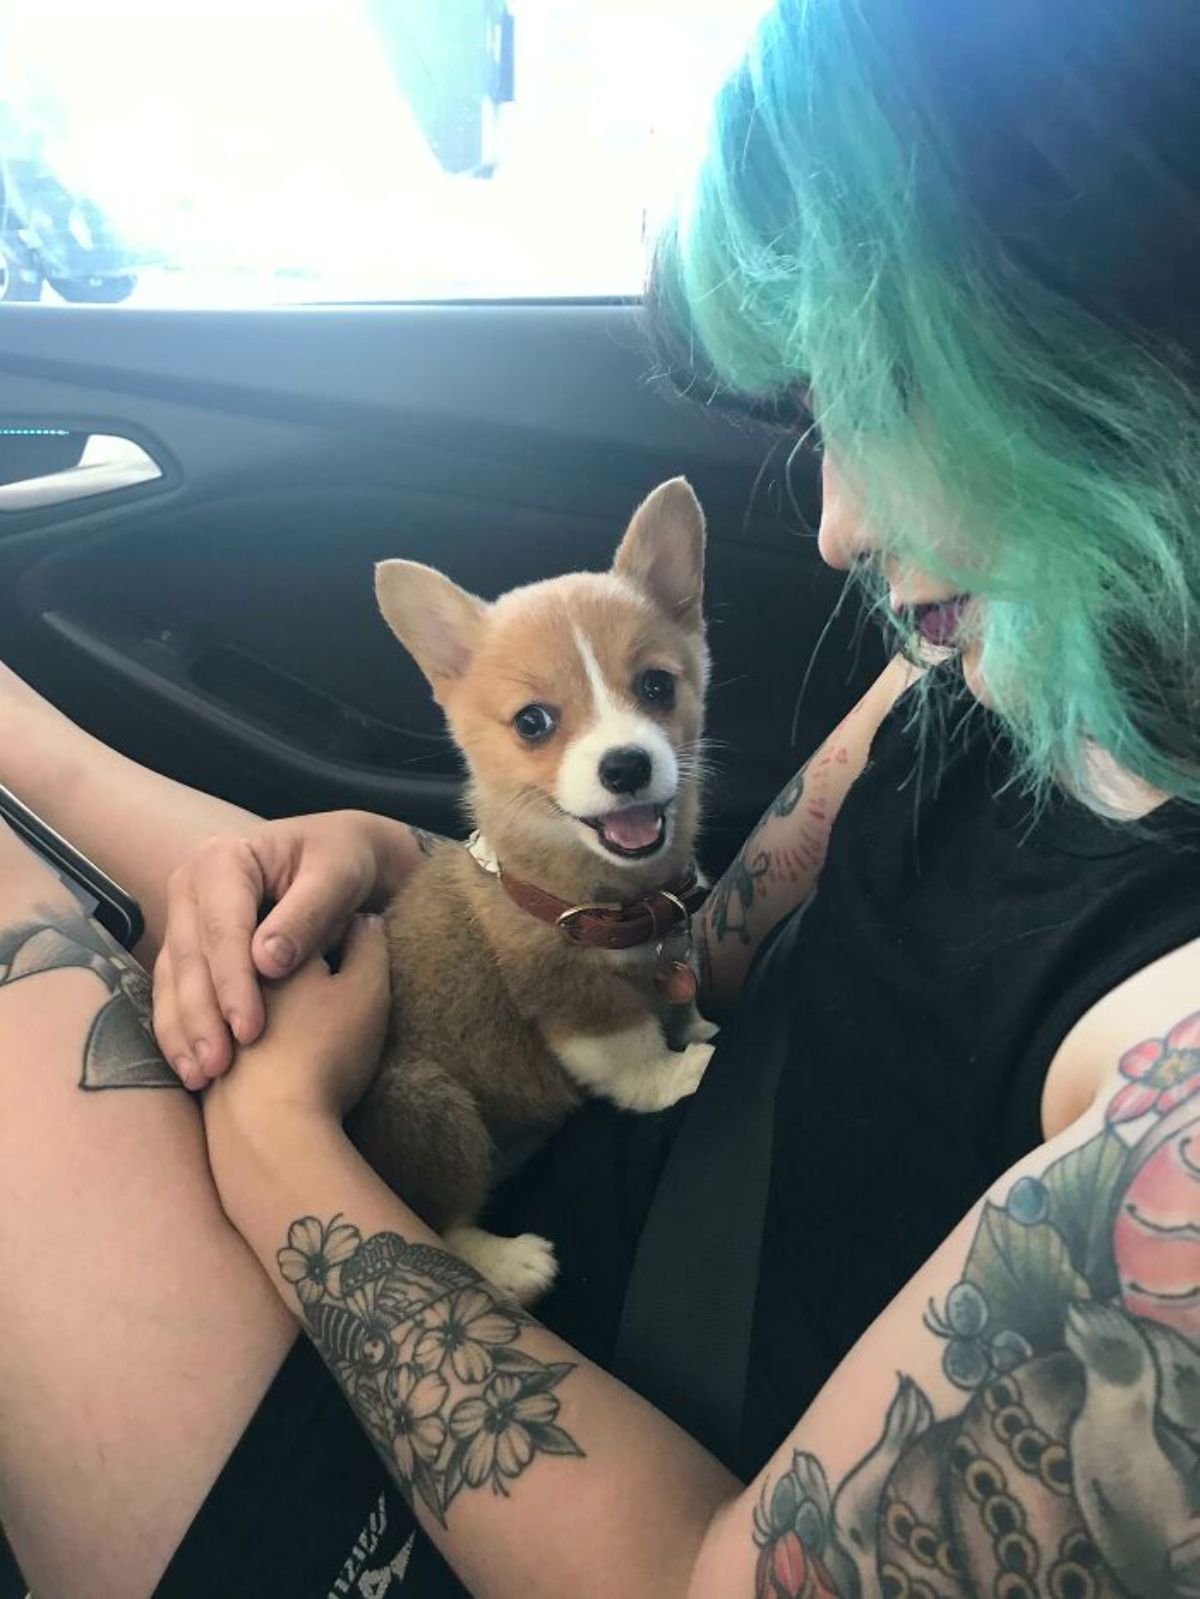 brown and white corgi puppy sitting on the lap of a woman in a car